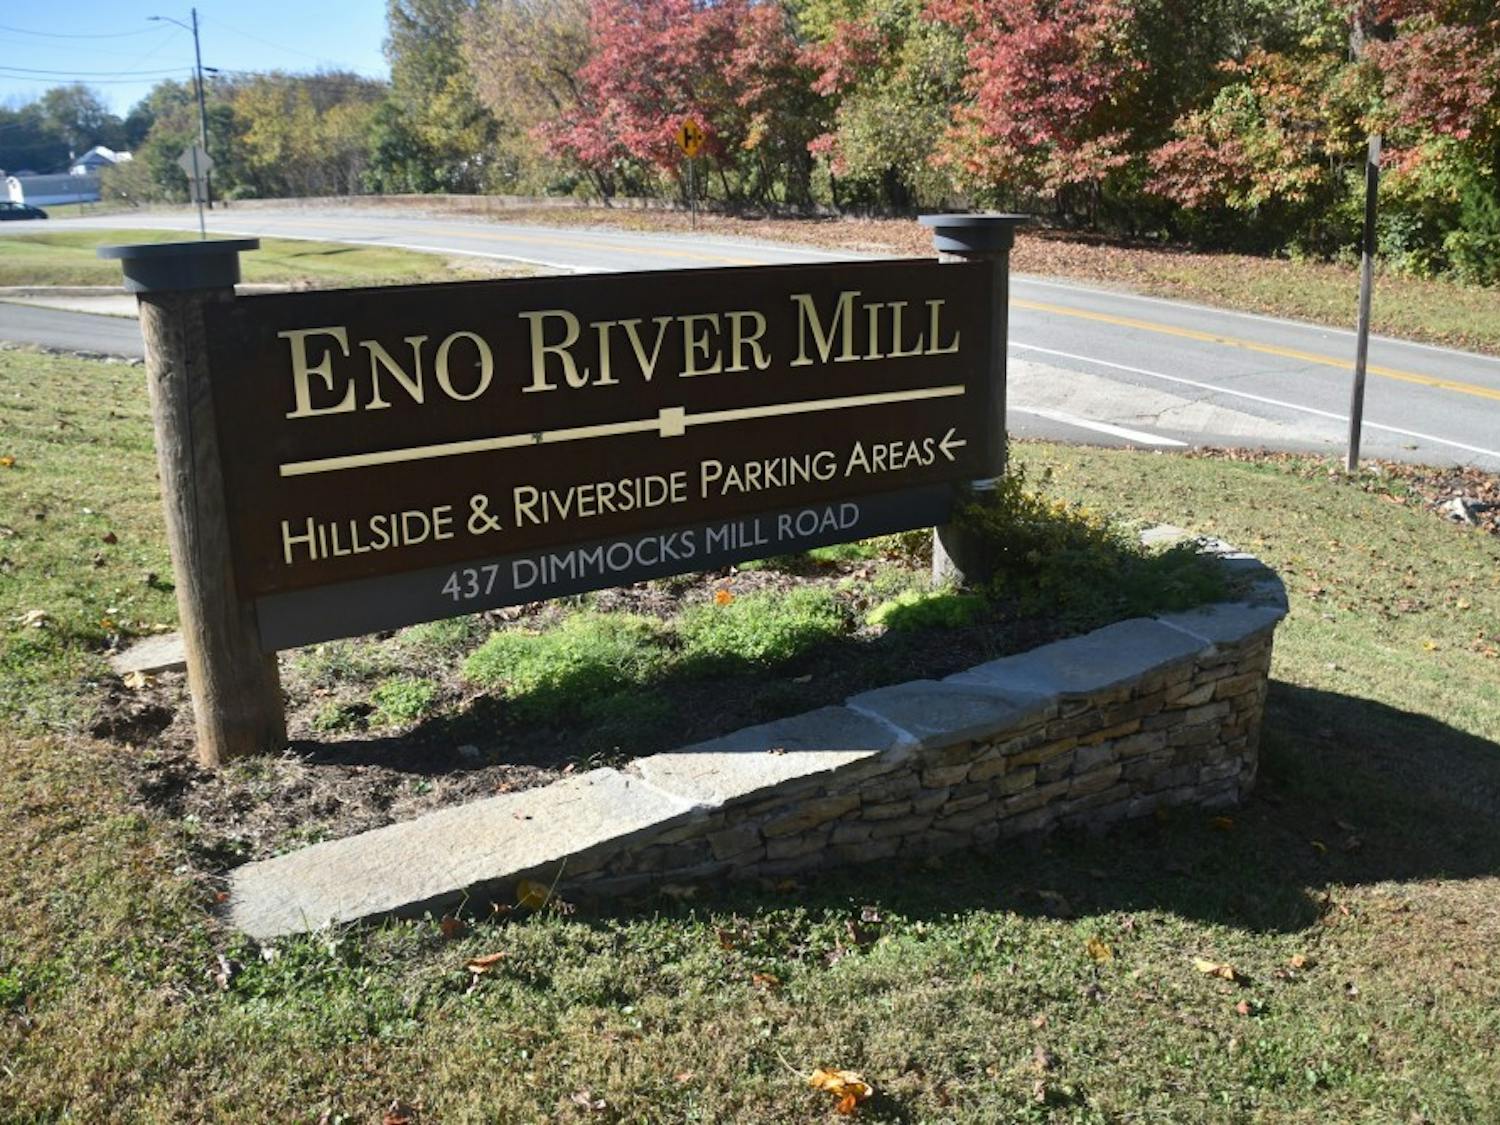 The Eno River Mill will soon be renting out spaces for art.